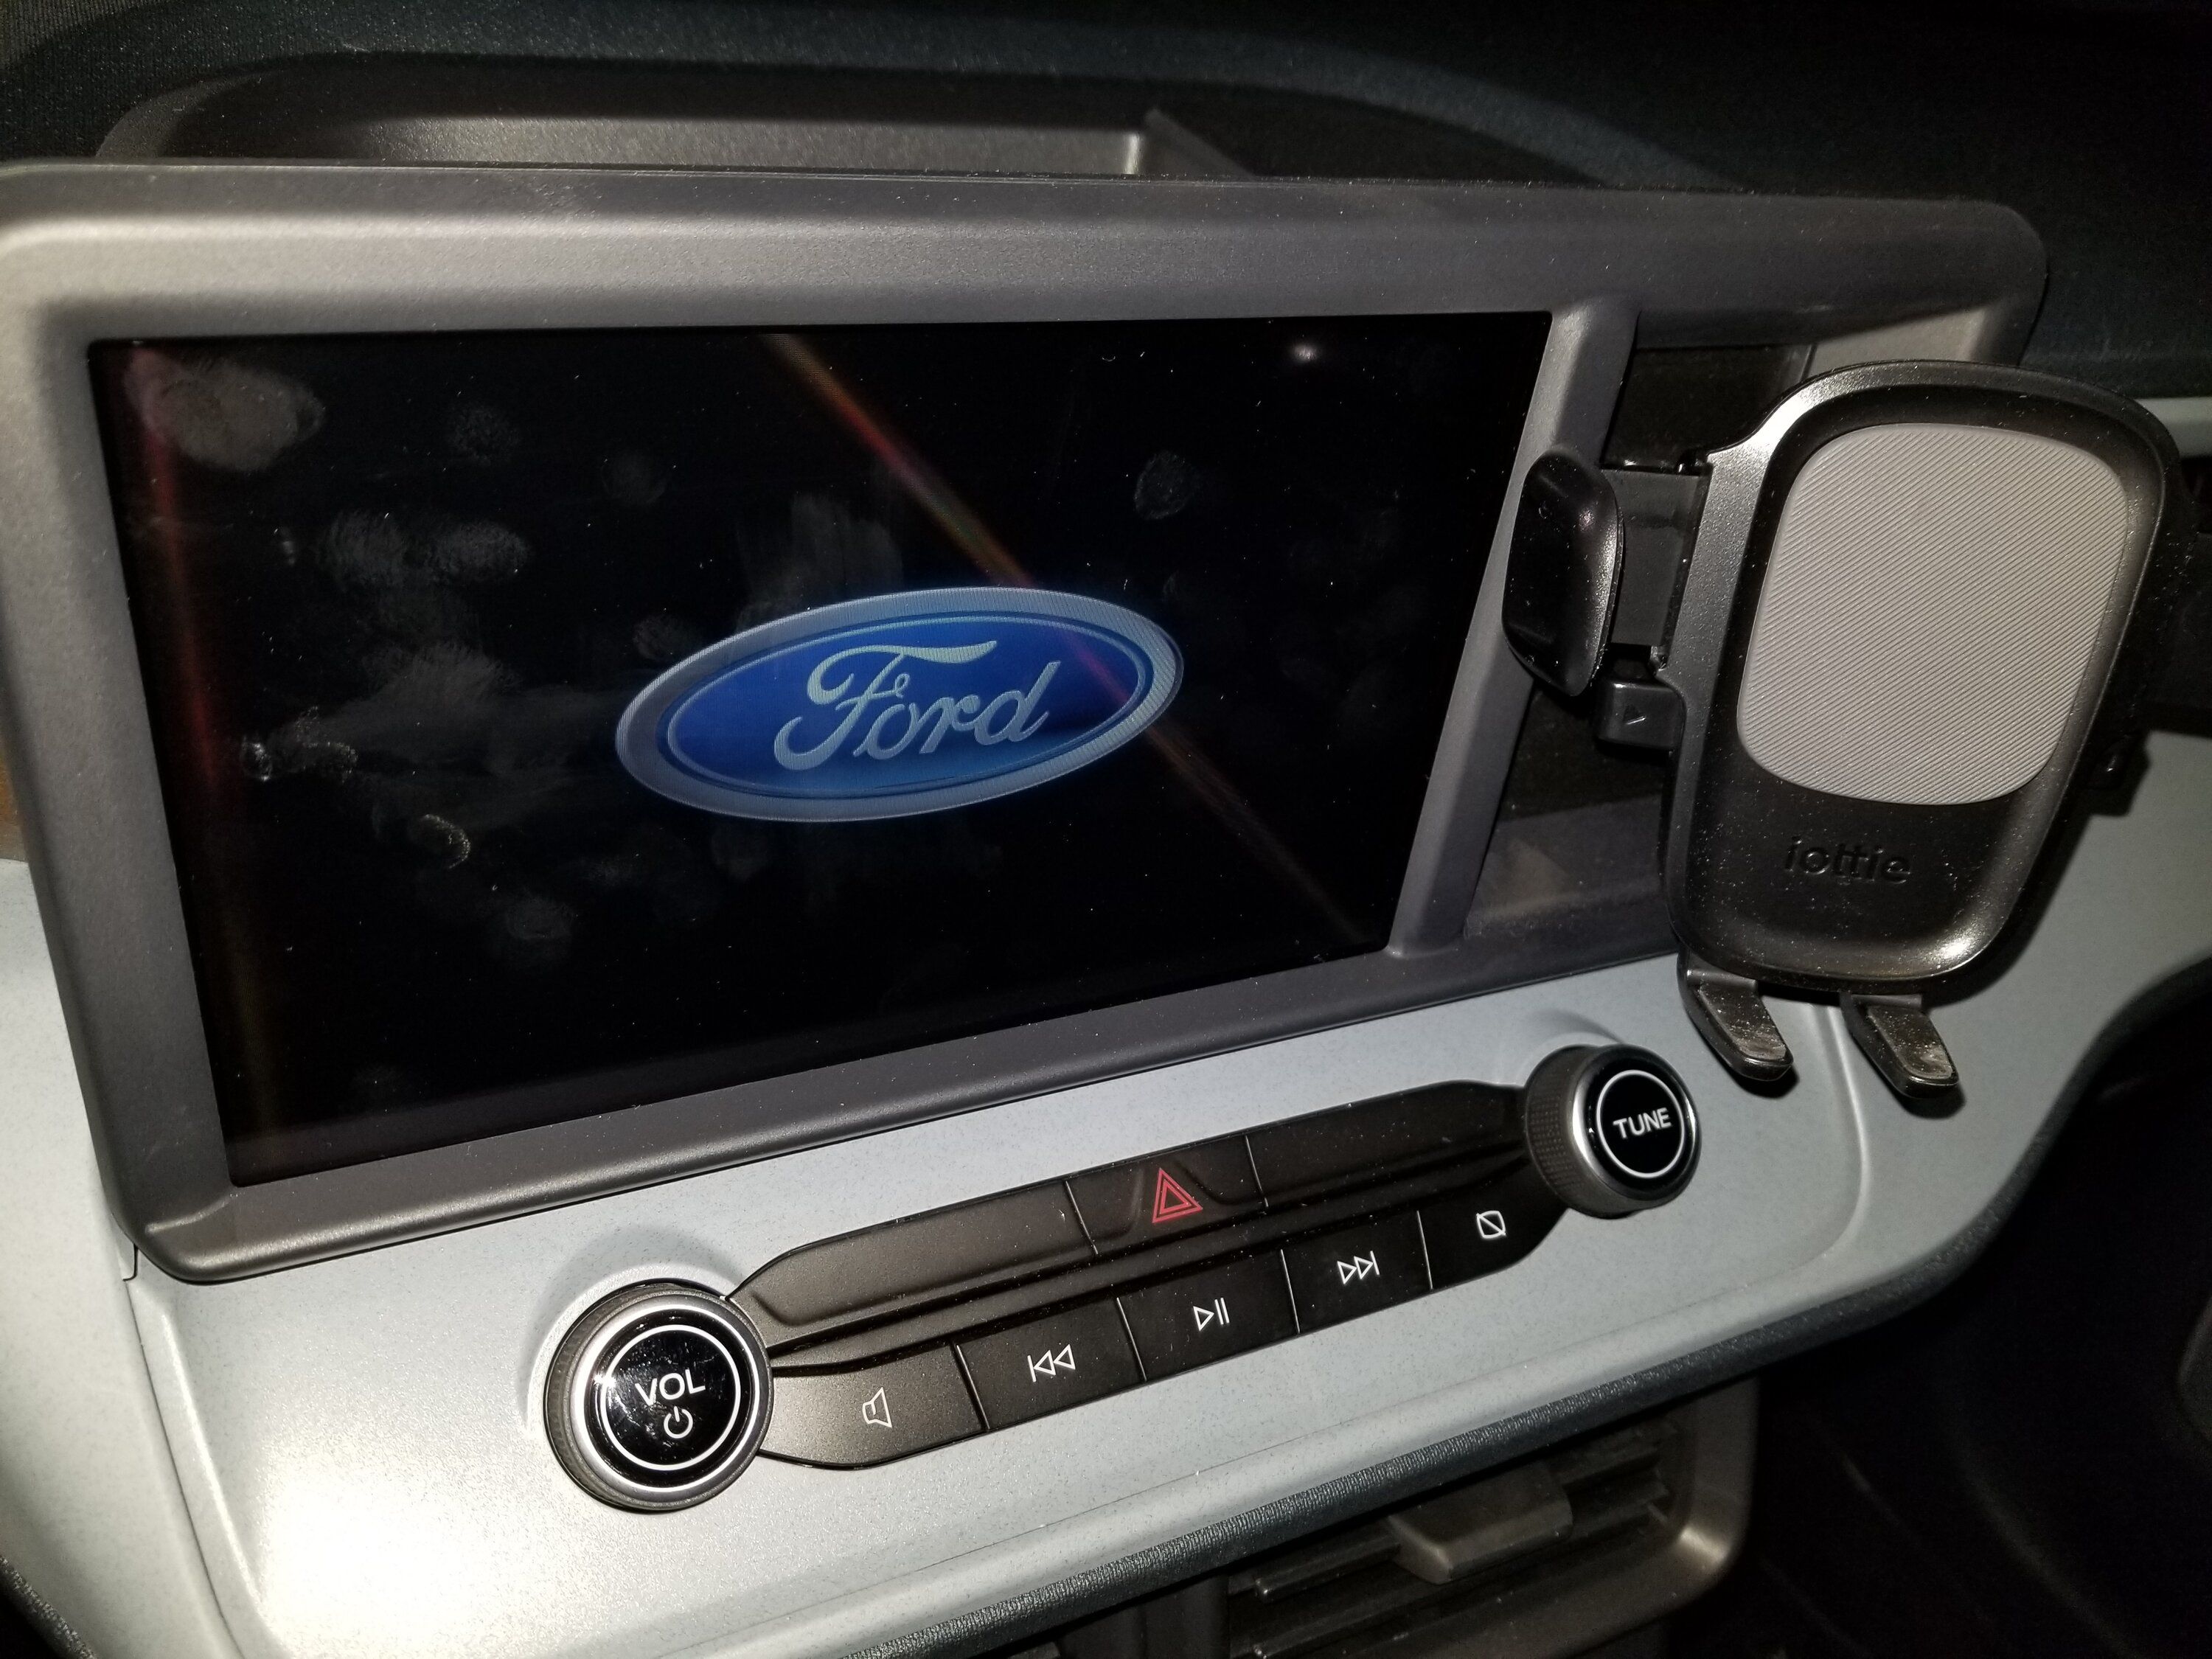 Ford Maverick Dash cubby hole -- what's in yours? 📸 20230222_215208